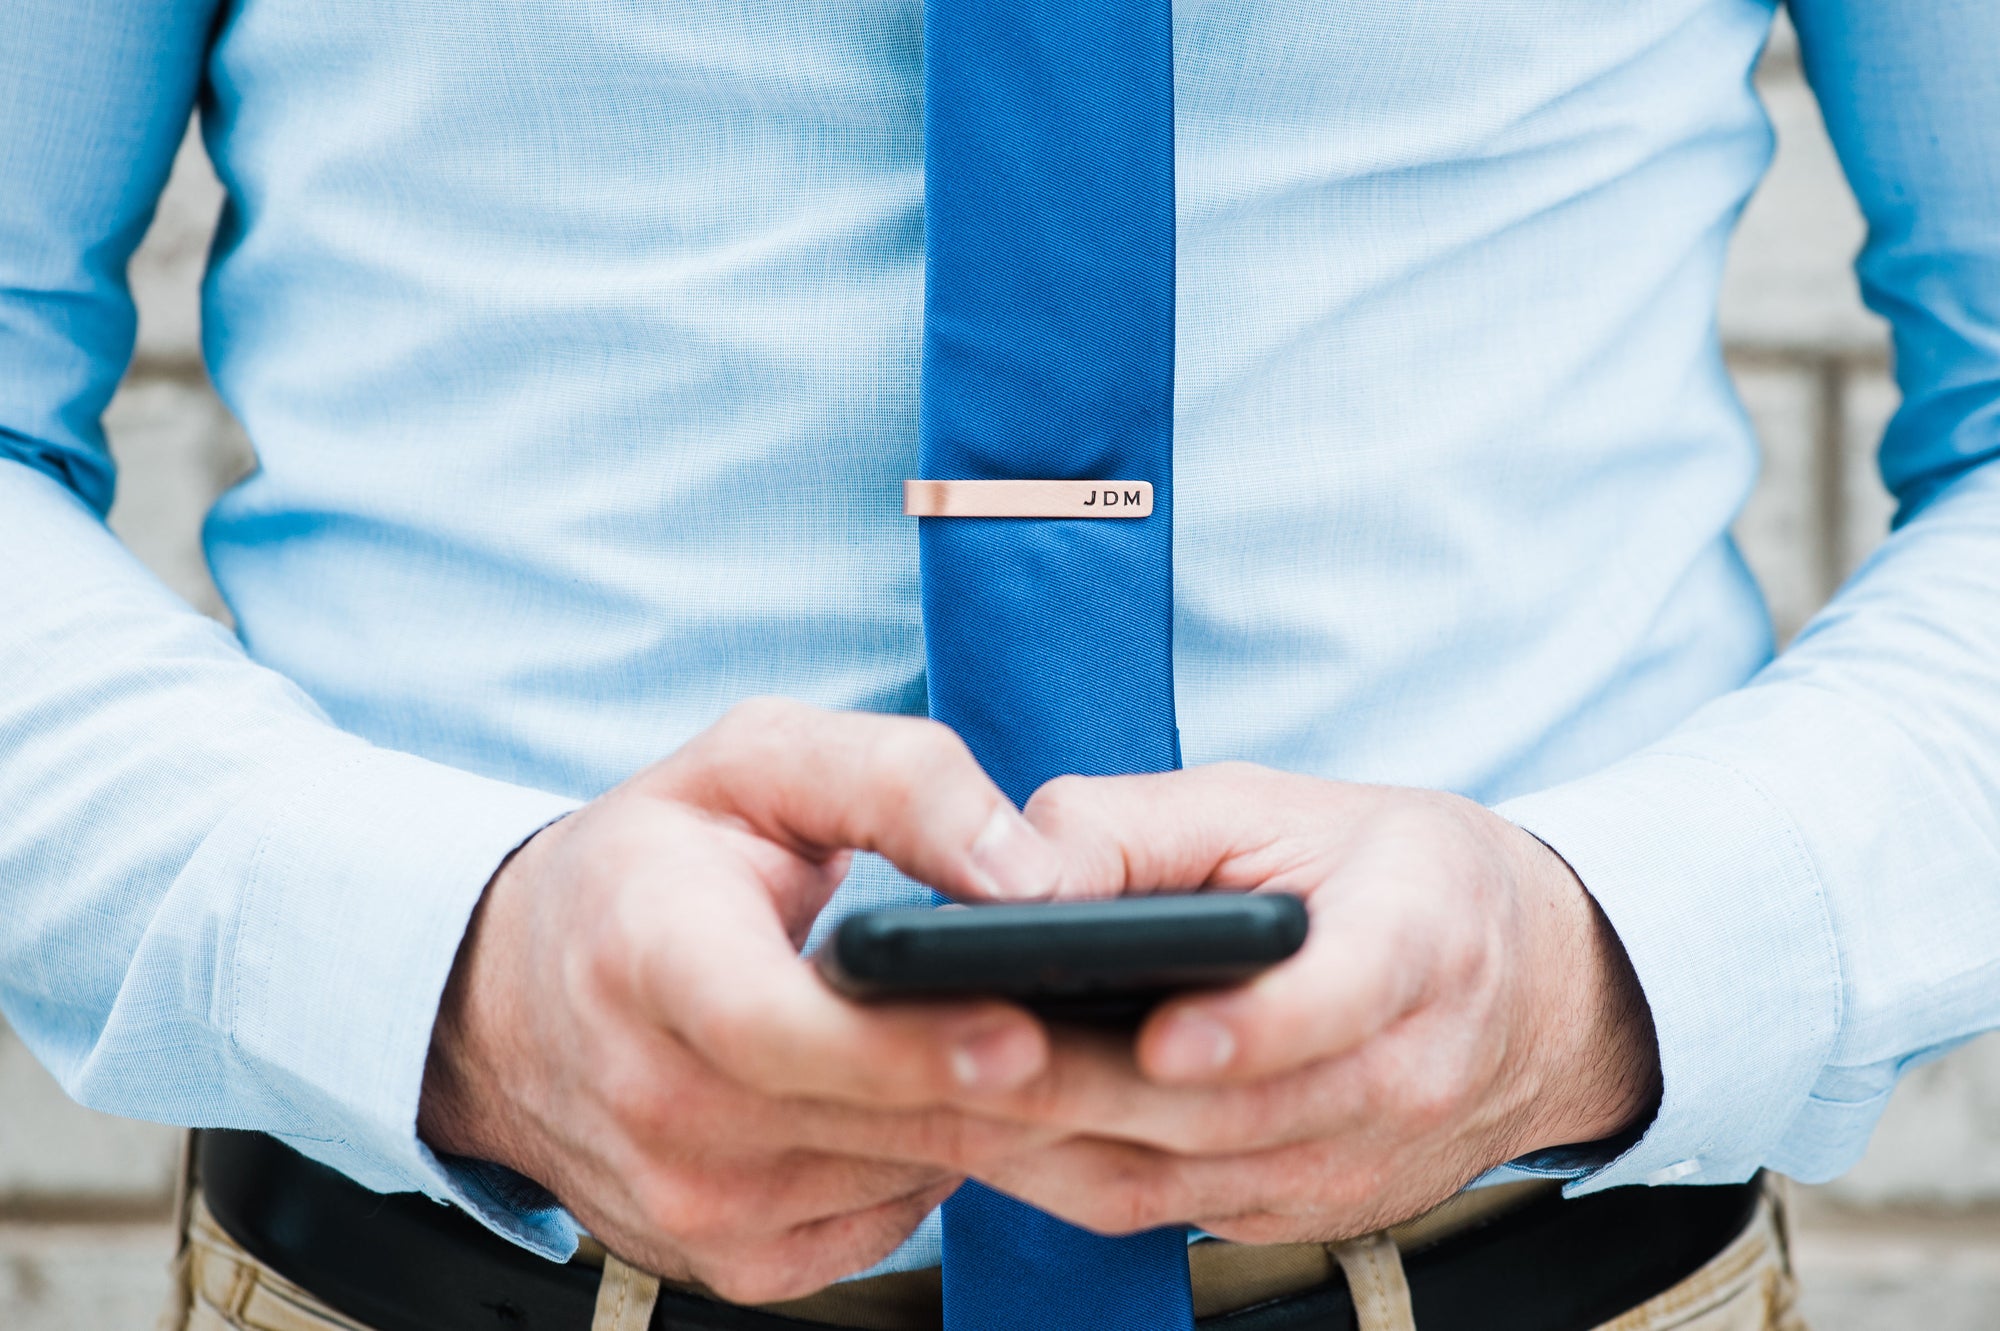 Man appears to be texting from his cell phone. He is wearing light blue shirt, dark blue tie. Attached to tie is a tie clip personalized with his initials.